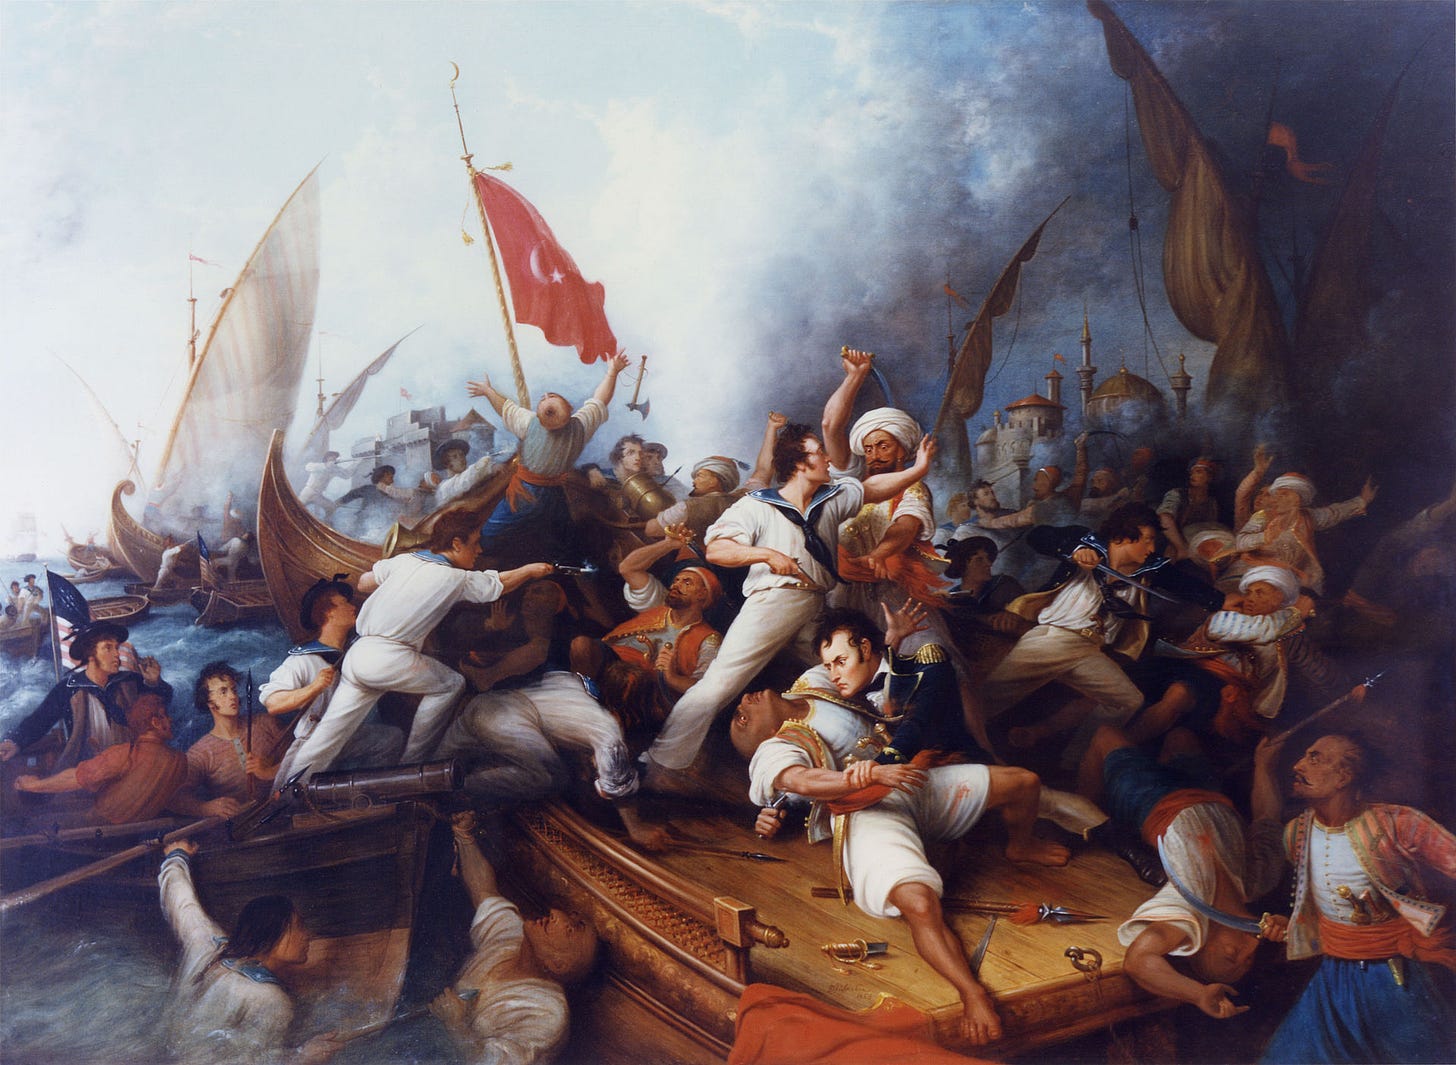 Painting of a raid that Decatur led in 1804. It was such an astonishing feat that one of Britain’s most respected naval commanders, Horatio Nelson, would call it the “most bold and daring act of the age.”